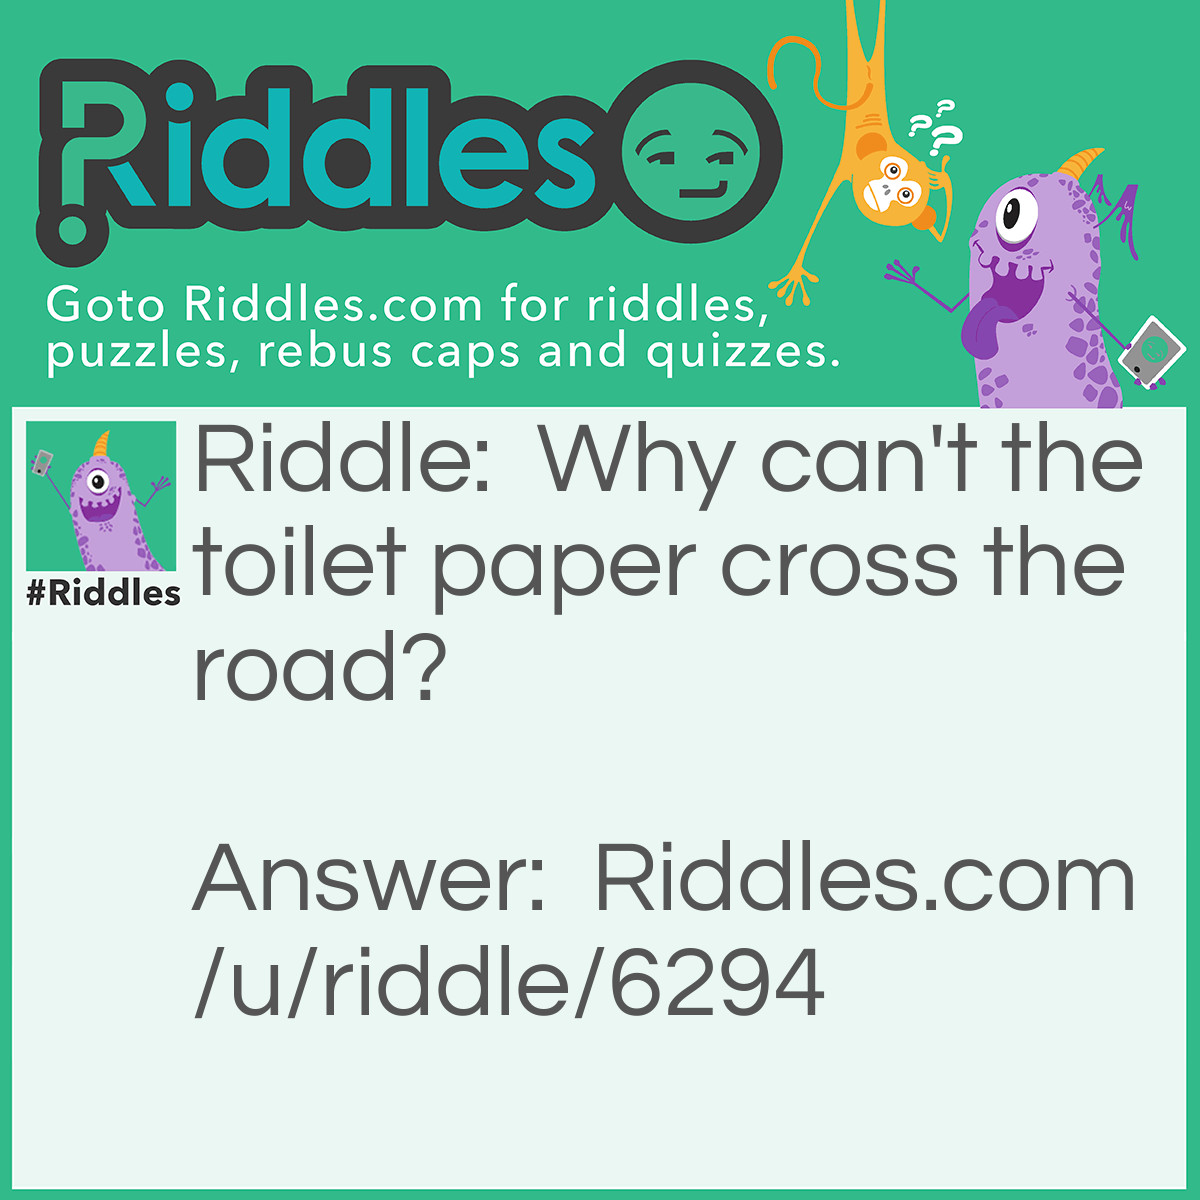 Riddle: Why can't the toilet paper cross the road? Answer: Because it got stuck in the crack.